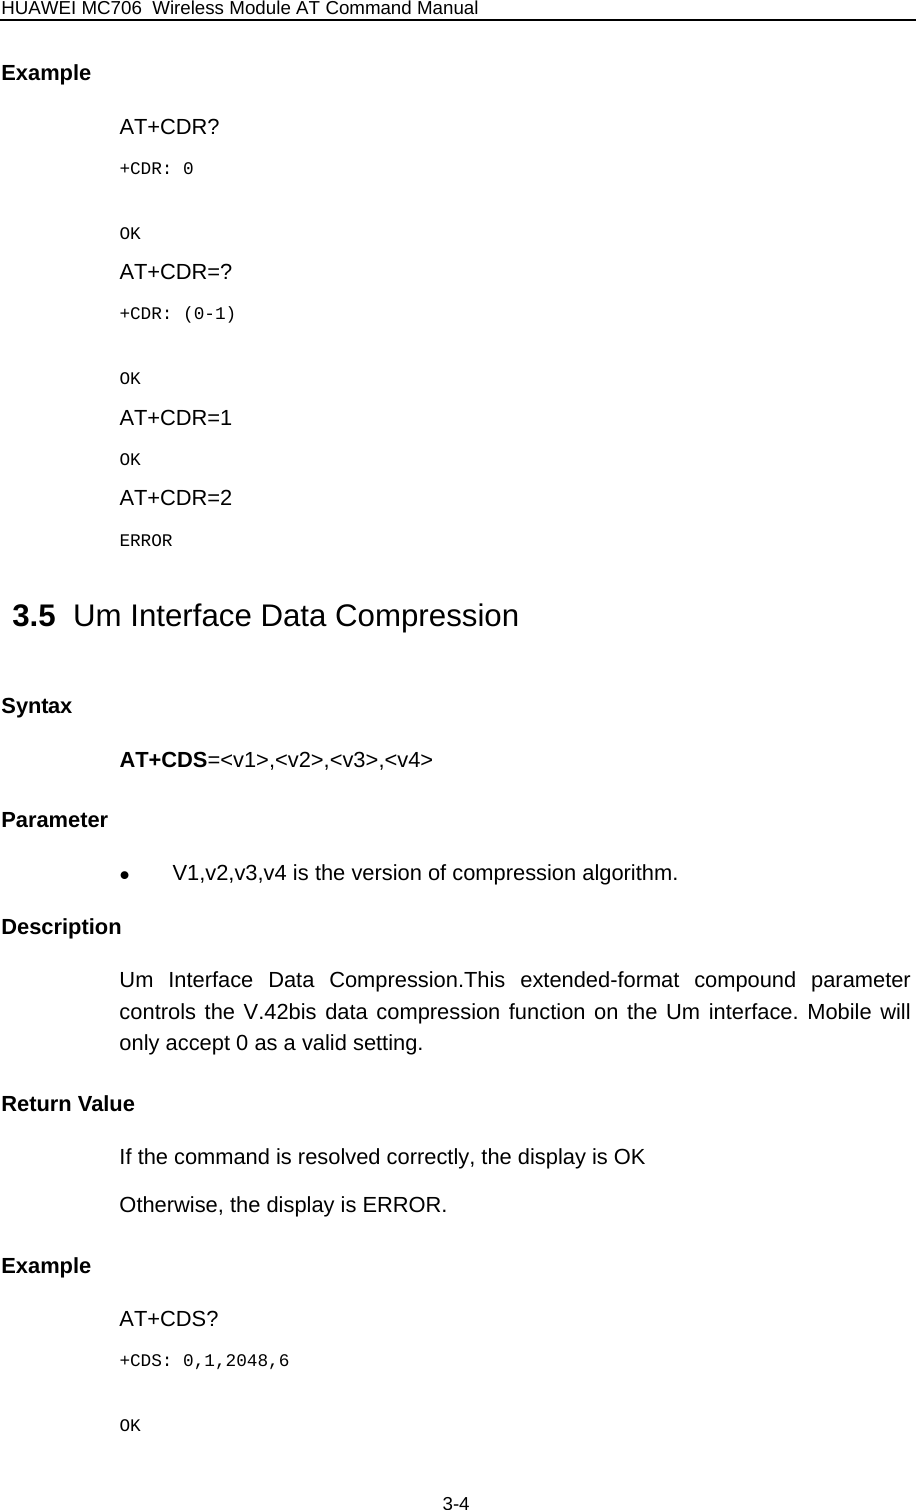 HUAWEI MC706 Wireless Module AT Command Manual  Example AT+CDR? +CDR: 0  OK AT+CDR=? +CDR: (0-1)  OK AT+CDR=1 OK AT+CDR=2 ERROR 3.5  Um Interface Data Compression Syntax AT+CDS=&lt;v1&gt;,&lt;v2&gt;,&lt;v3&gt;,&lt;v4&gt; Parameter z V1,v2,v3,v4 is the version of compression algorithm. Description Um Interface Data Compression.This extended-format compound parameter controls the V.42bis data compression function on the Um interface. Mobile will only accept 0 as a valid setting. Return Value If the command is resolved correctly, the display is OK Otherwise, the display is ERROR. Example AT+CDS? +CDS: 0,1,2048,6  OK 3-4 